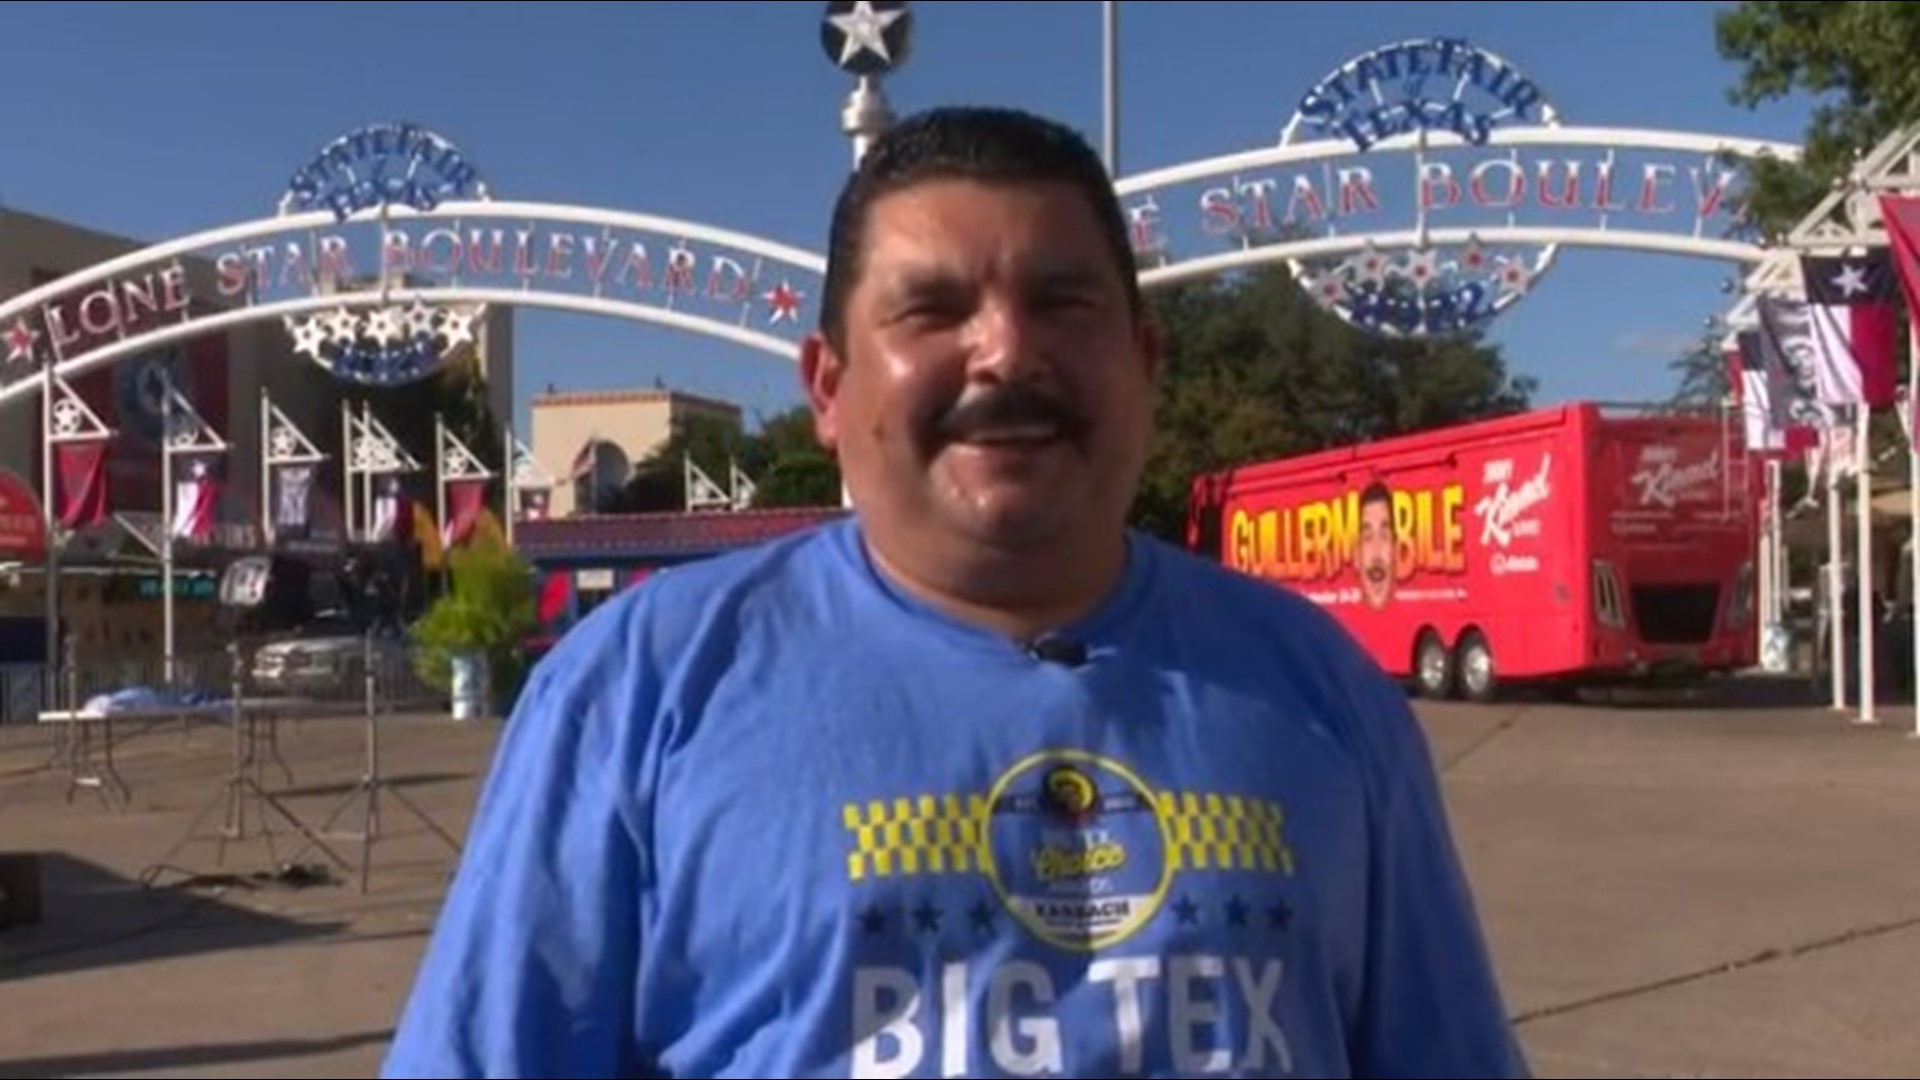 "Jimmy Kimmel Live" star Guillermo Rodriguez is stopping for a taste of Texas at Fair Park on Tuesday.